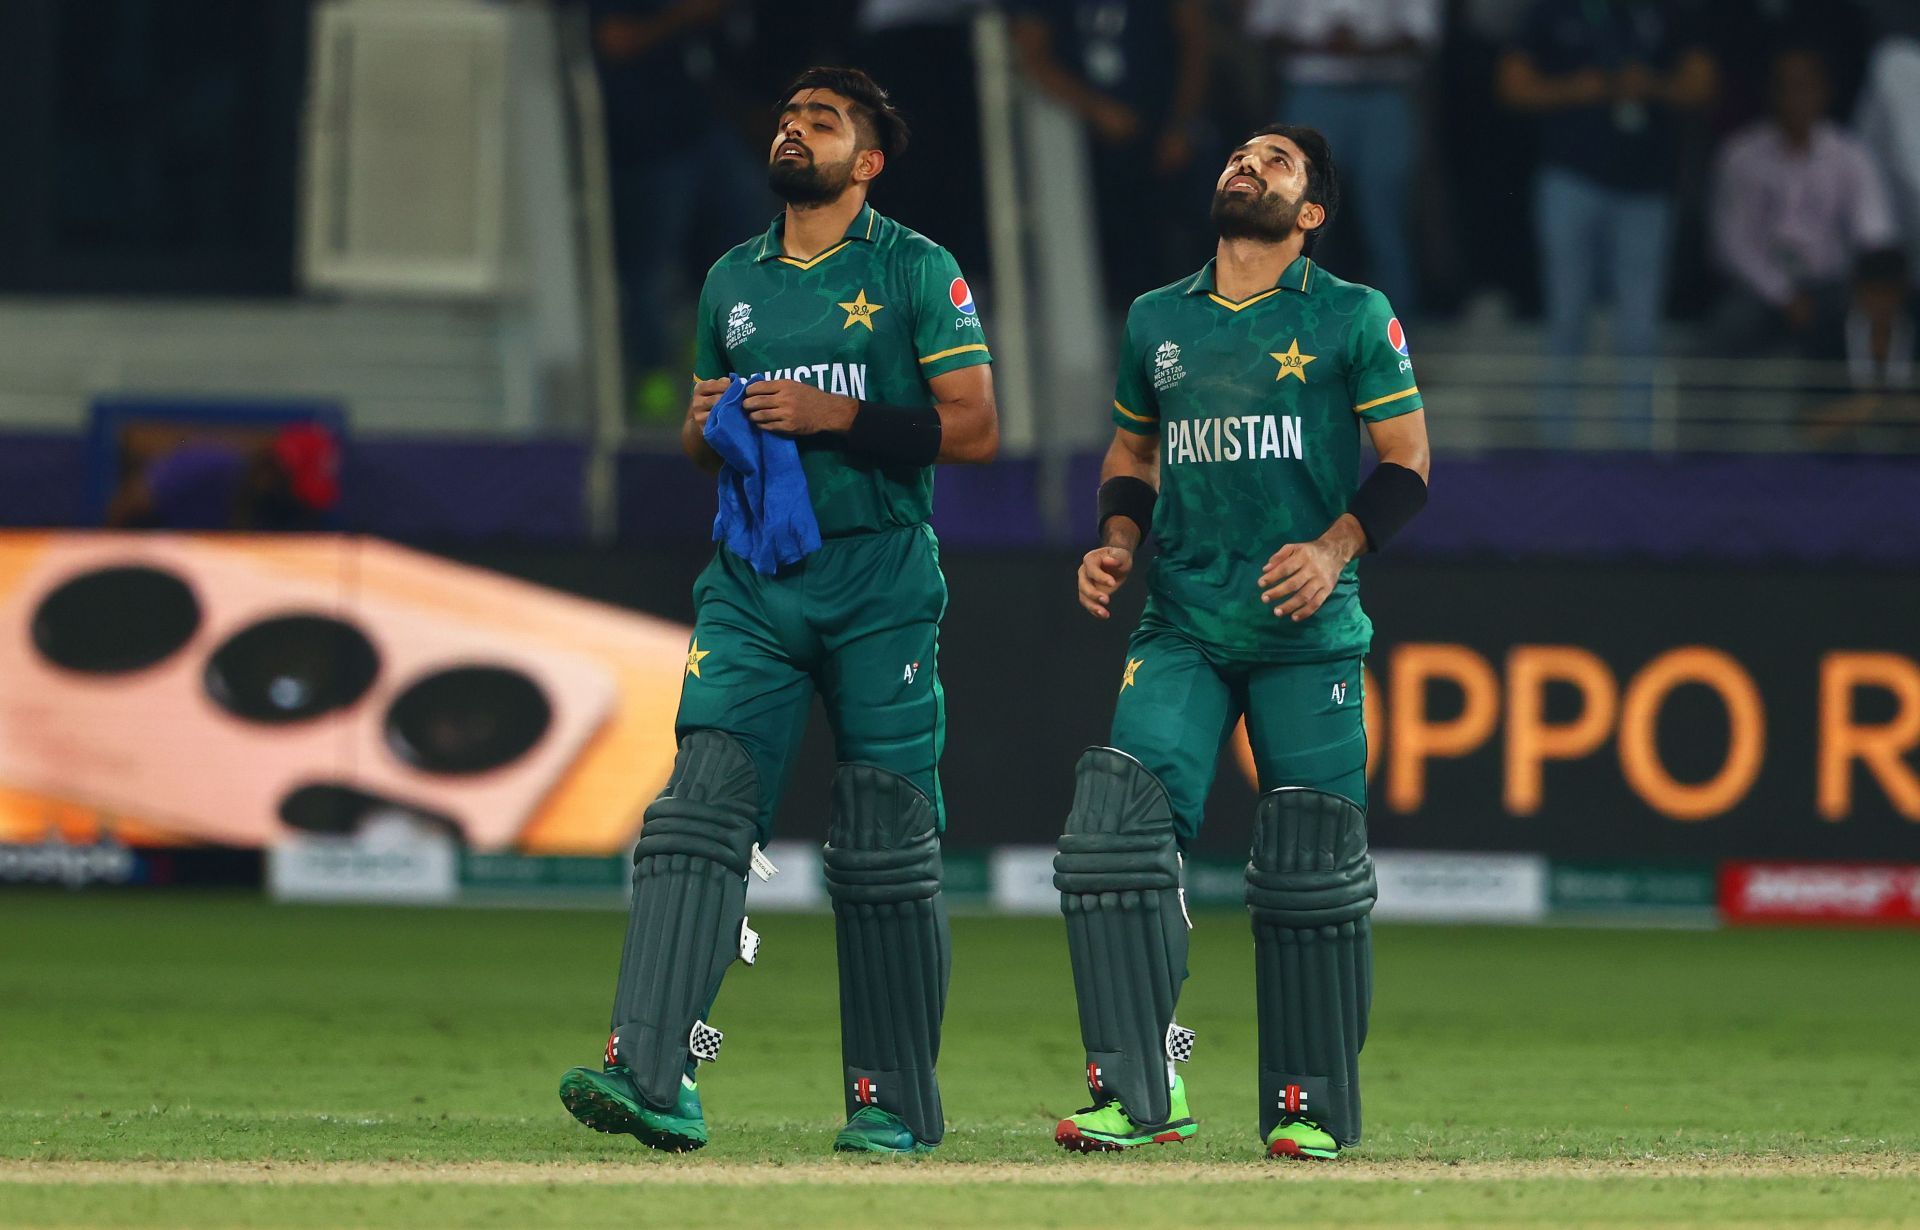 Babar Azam is ranked No.1 in T20I batter rankings, while Mohammad Rizwan is third.